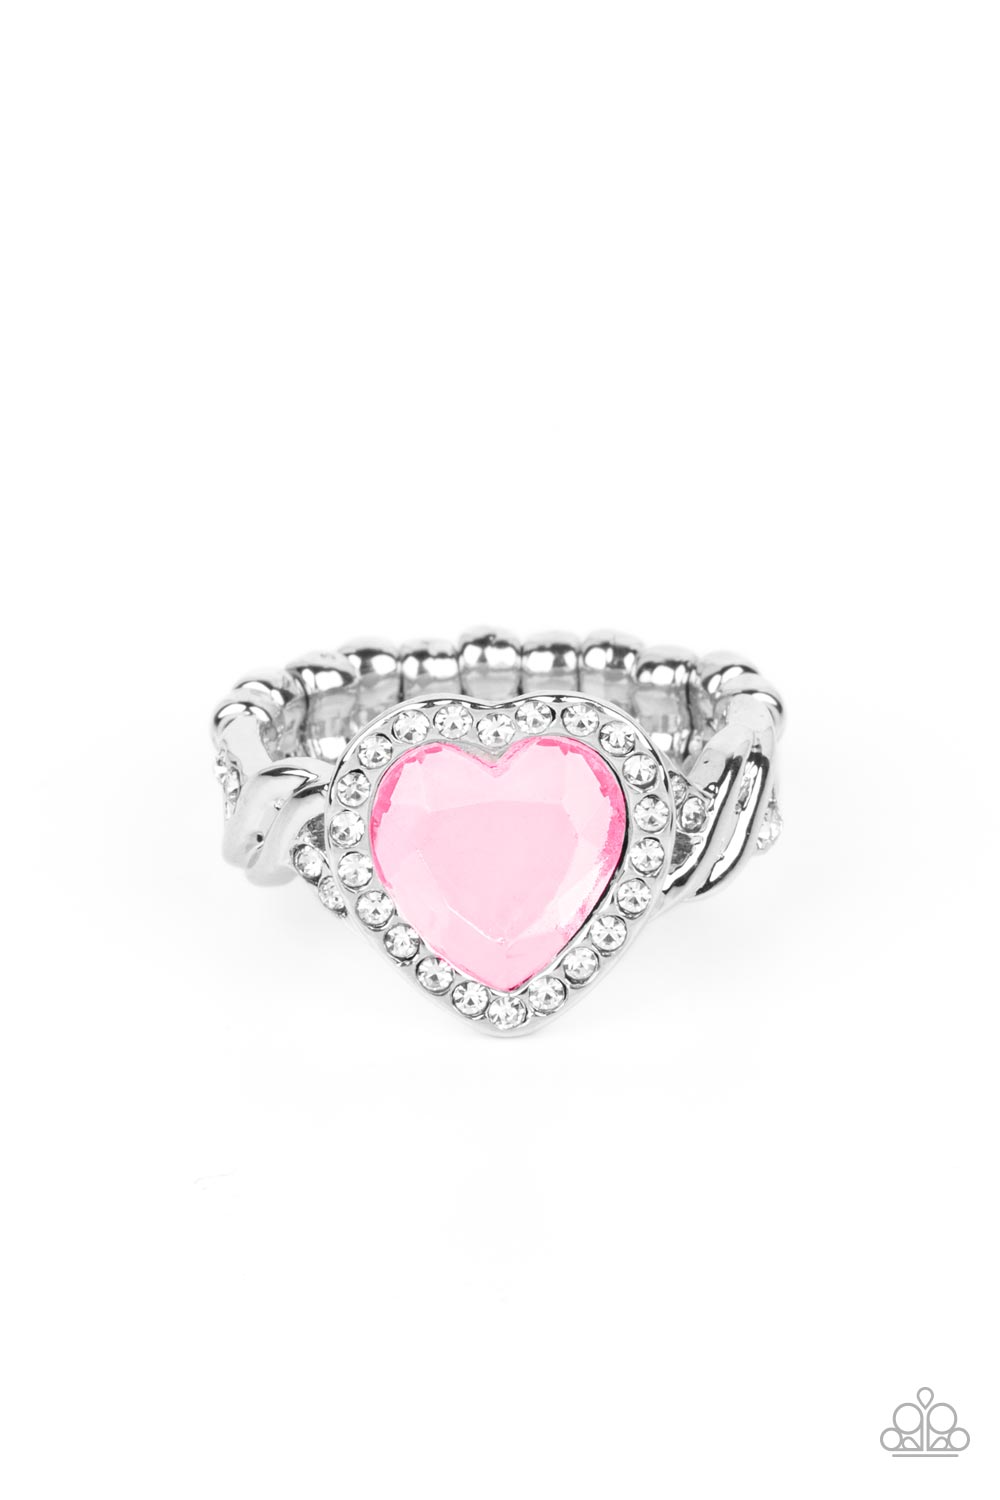 Committed to Cupid Pink Rhinestone Heart Ring - Paparazzi Accessories- lightbox - CarasShop.com - $5 Jewelry by Cara Jewels